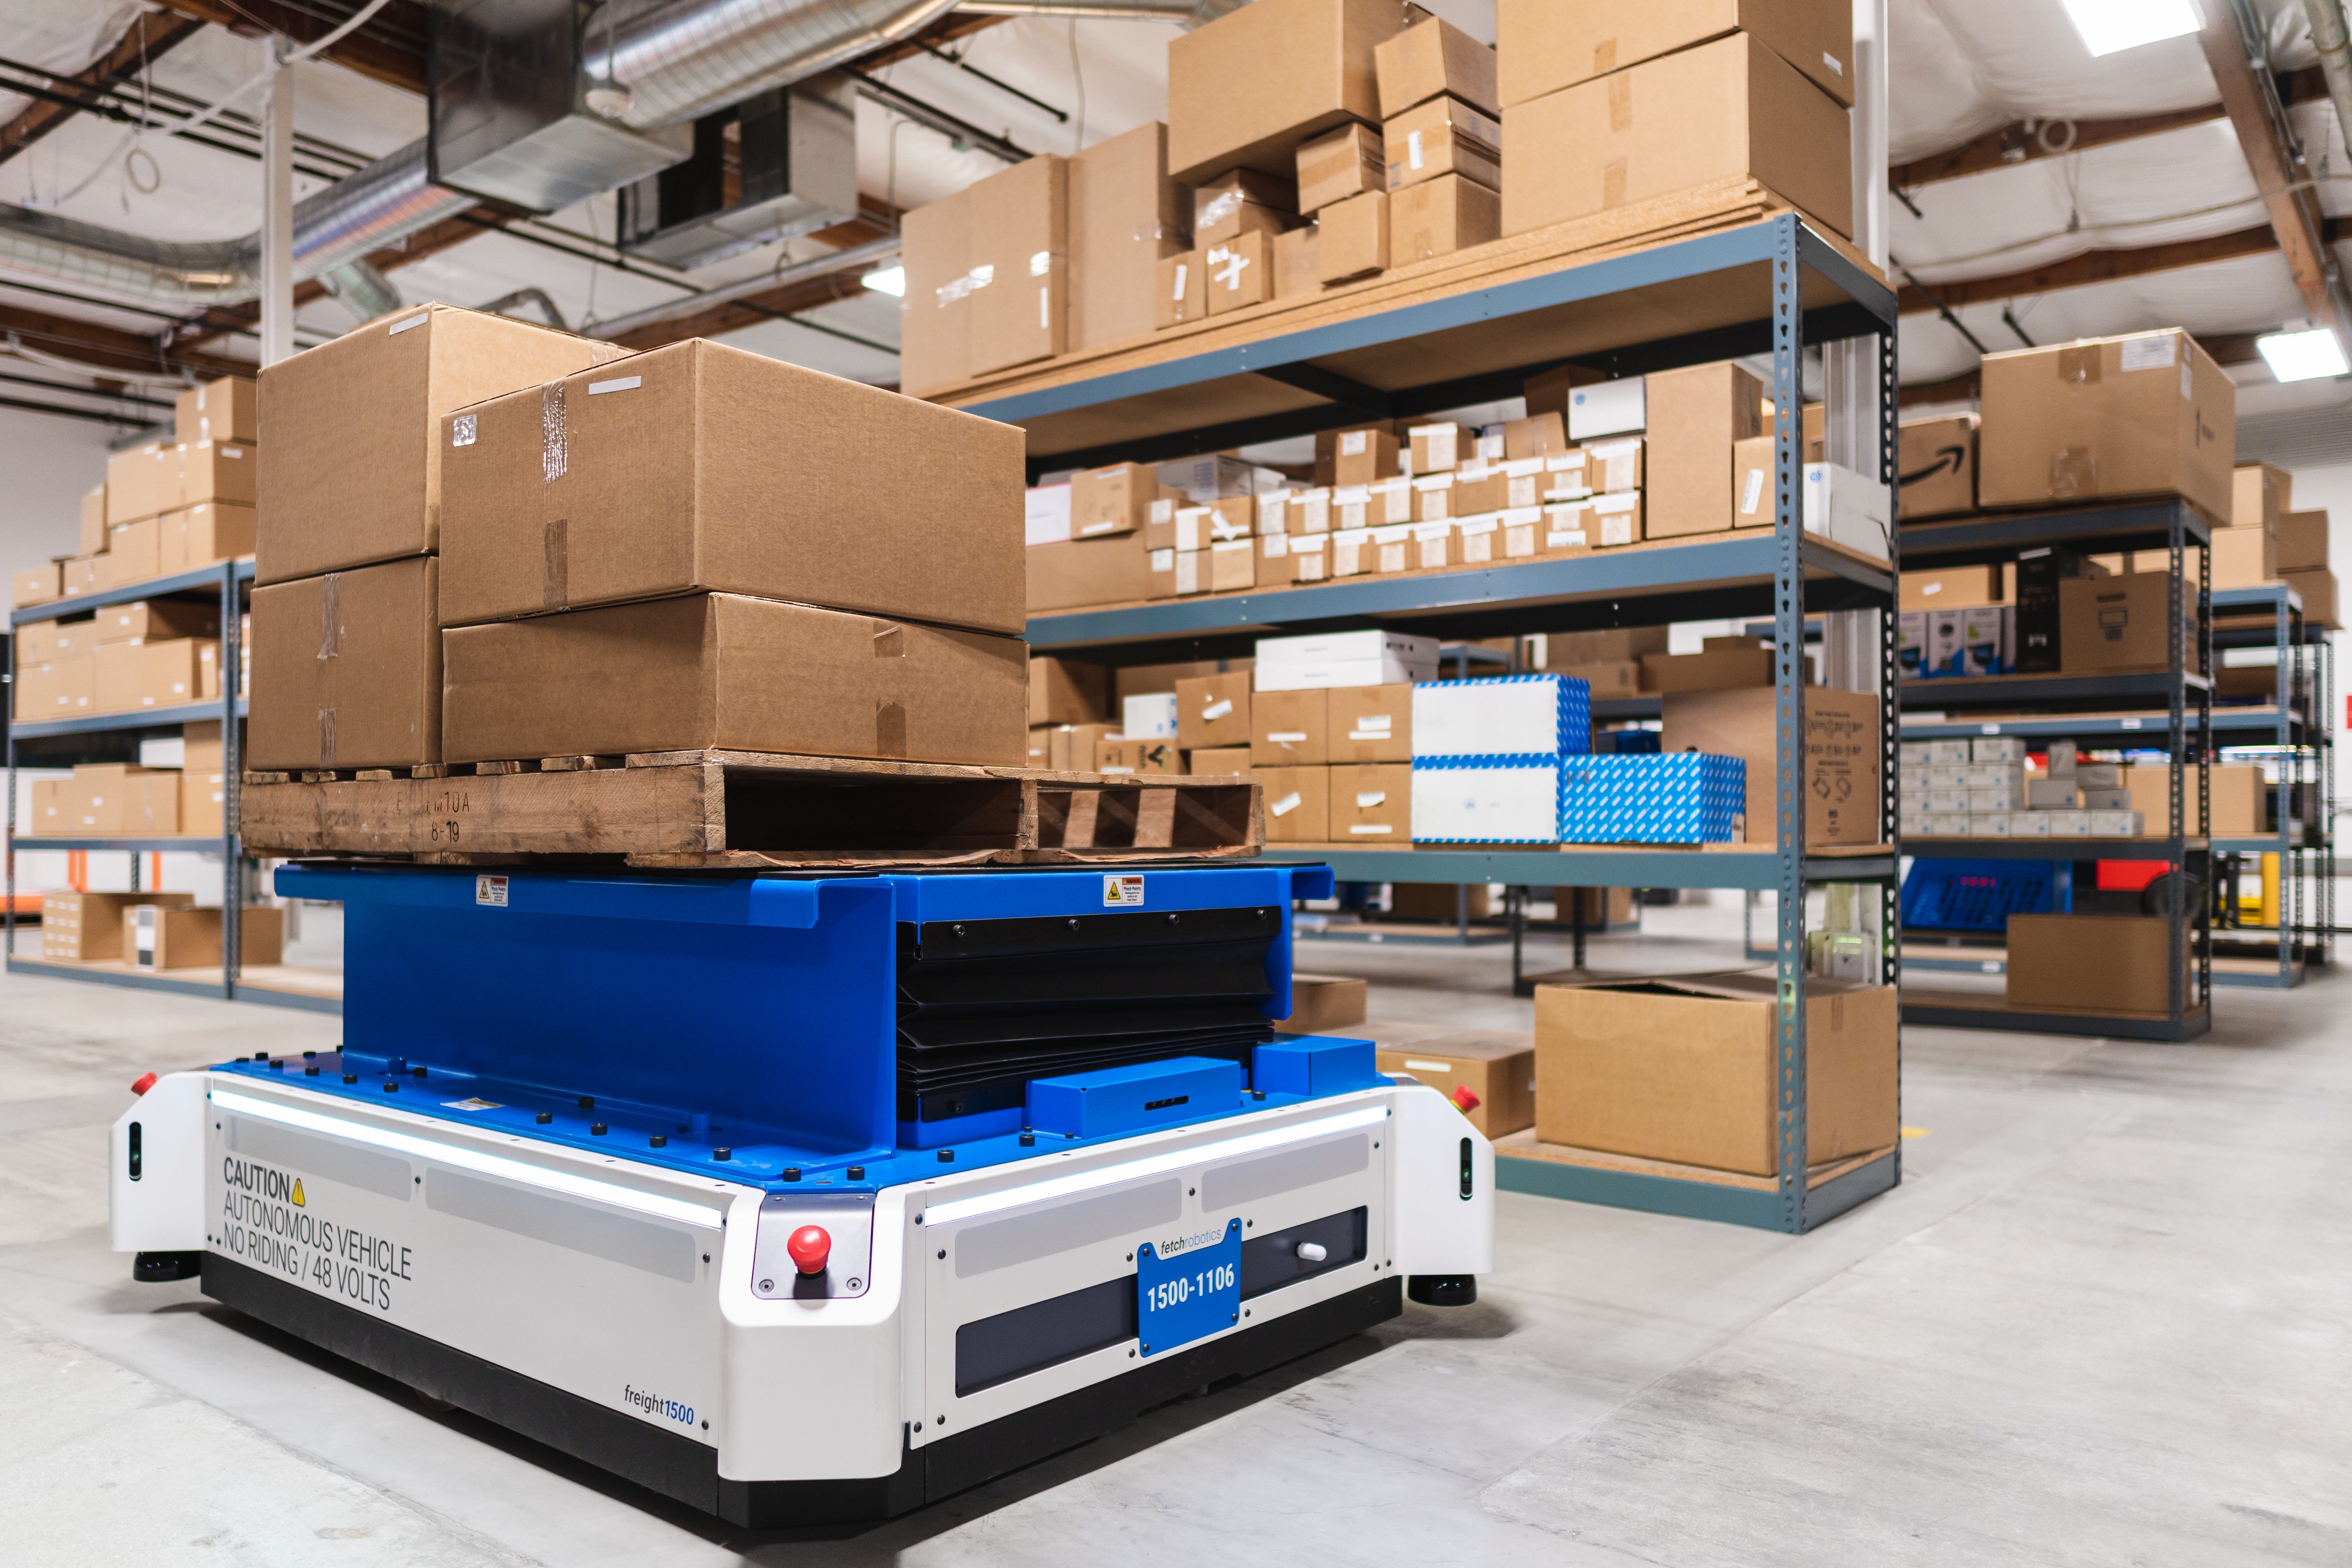 Fetch's warehouse is designed to replace forklifts TechCrunch